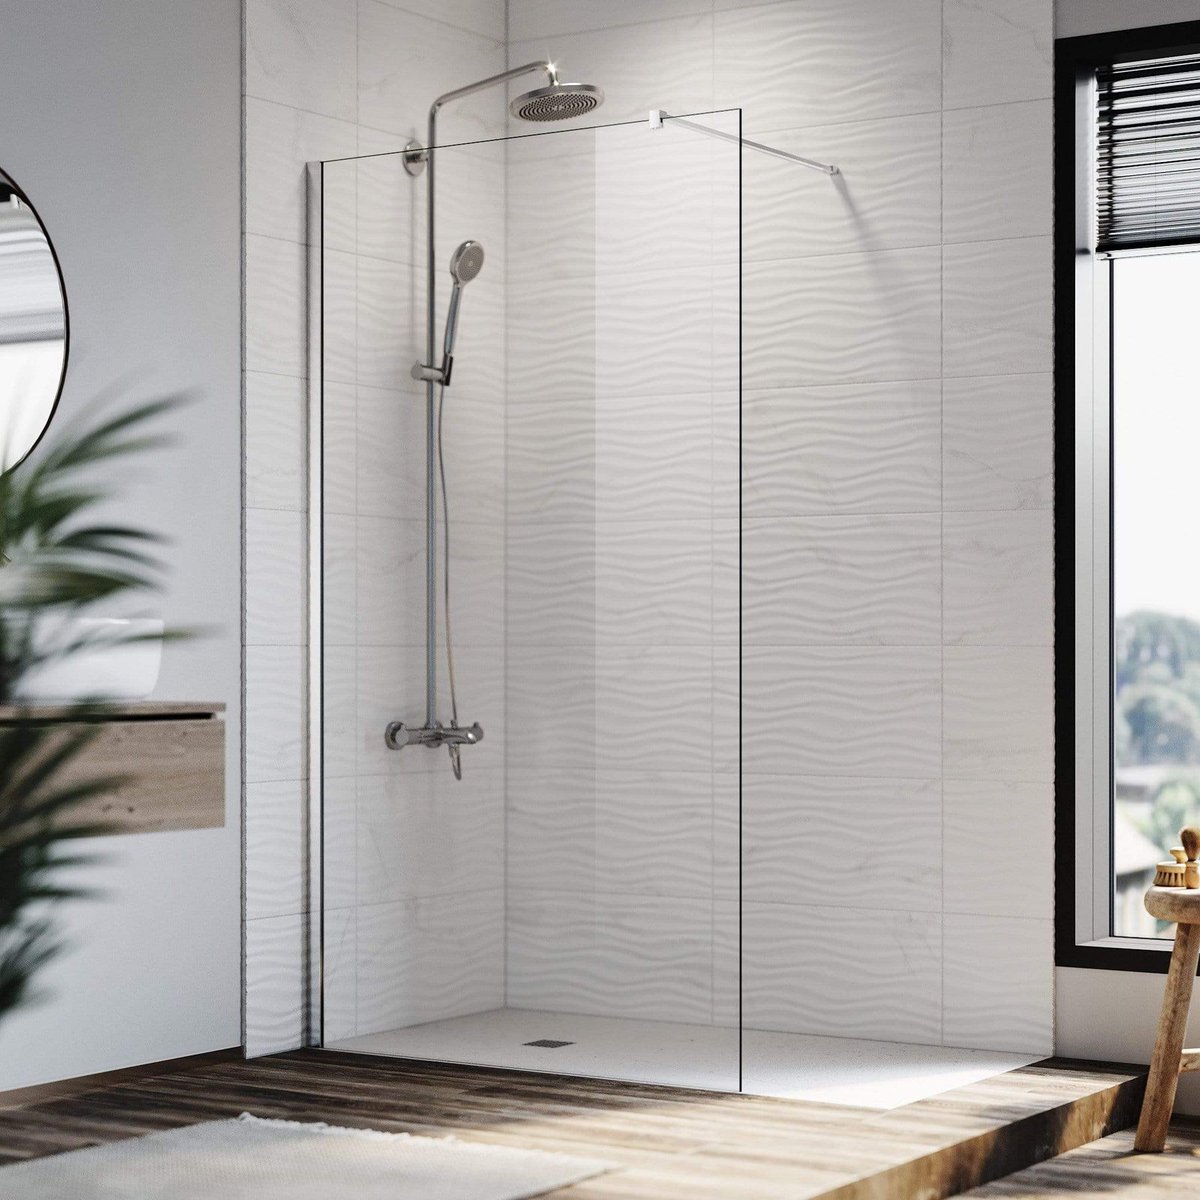 Revamp your bathroom with our Frameless Glass Walk-In Shower! 🚿✨ Easy-clean nano-coated glass, reversible design & sturdy SS304 bar. Customers rave about the quality & style! Shop now at Elegant Showers. #BathroomGoals #ElegantShowers 🛁💧